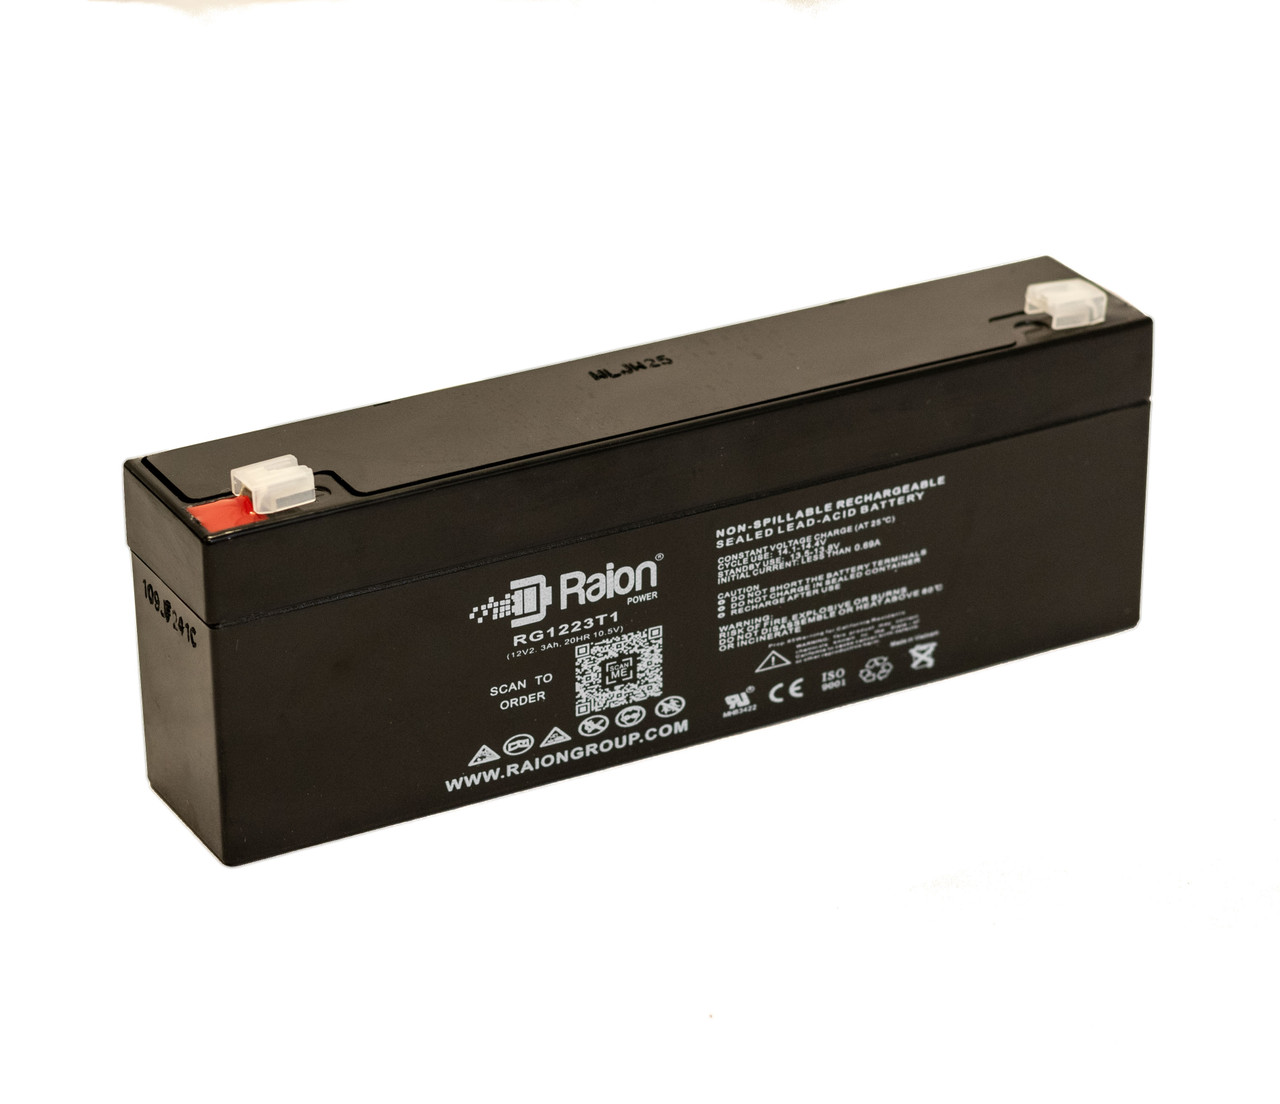 Raion Power RG1223T1 Replacement Battery for Odonnell 7793P